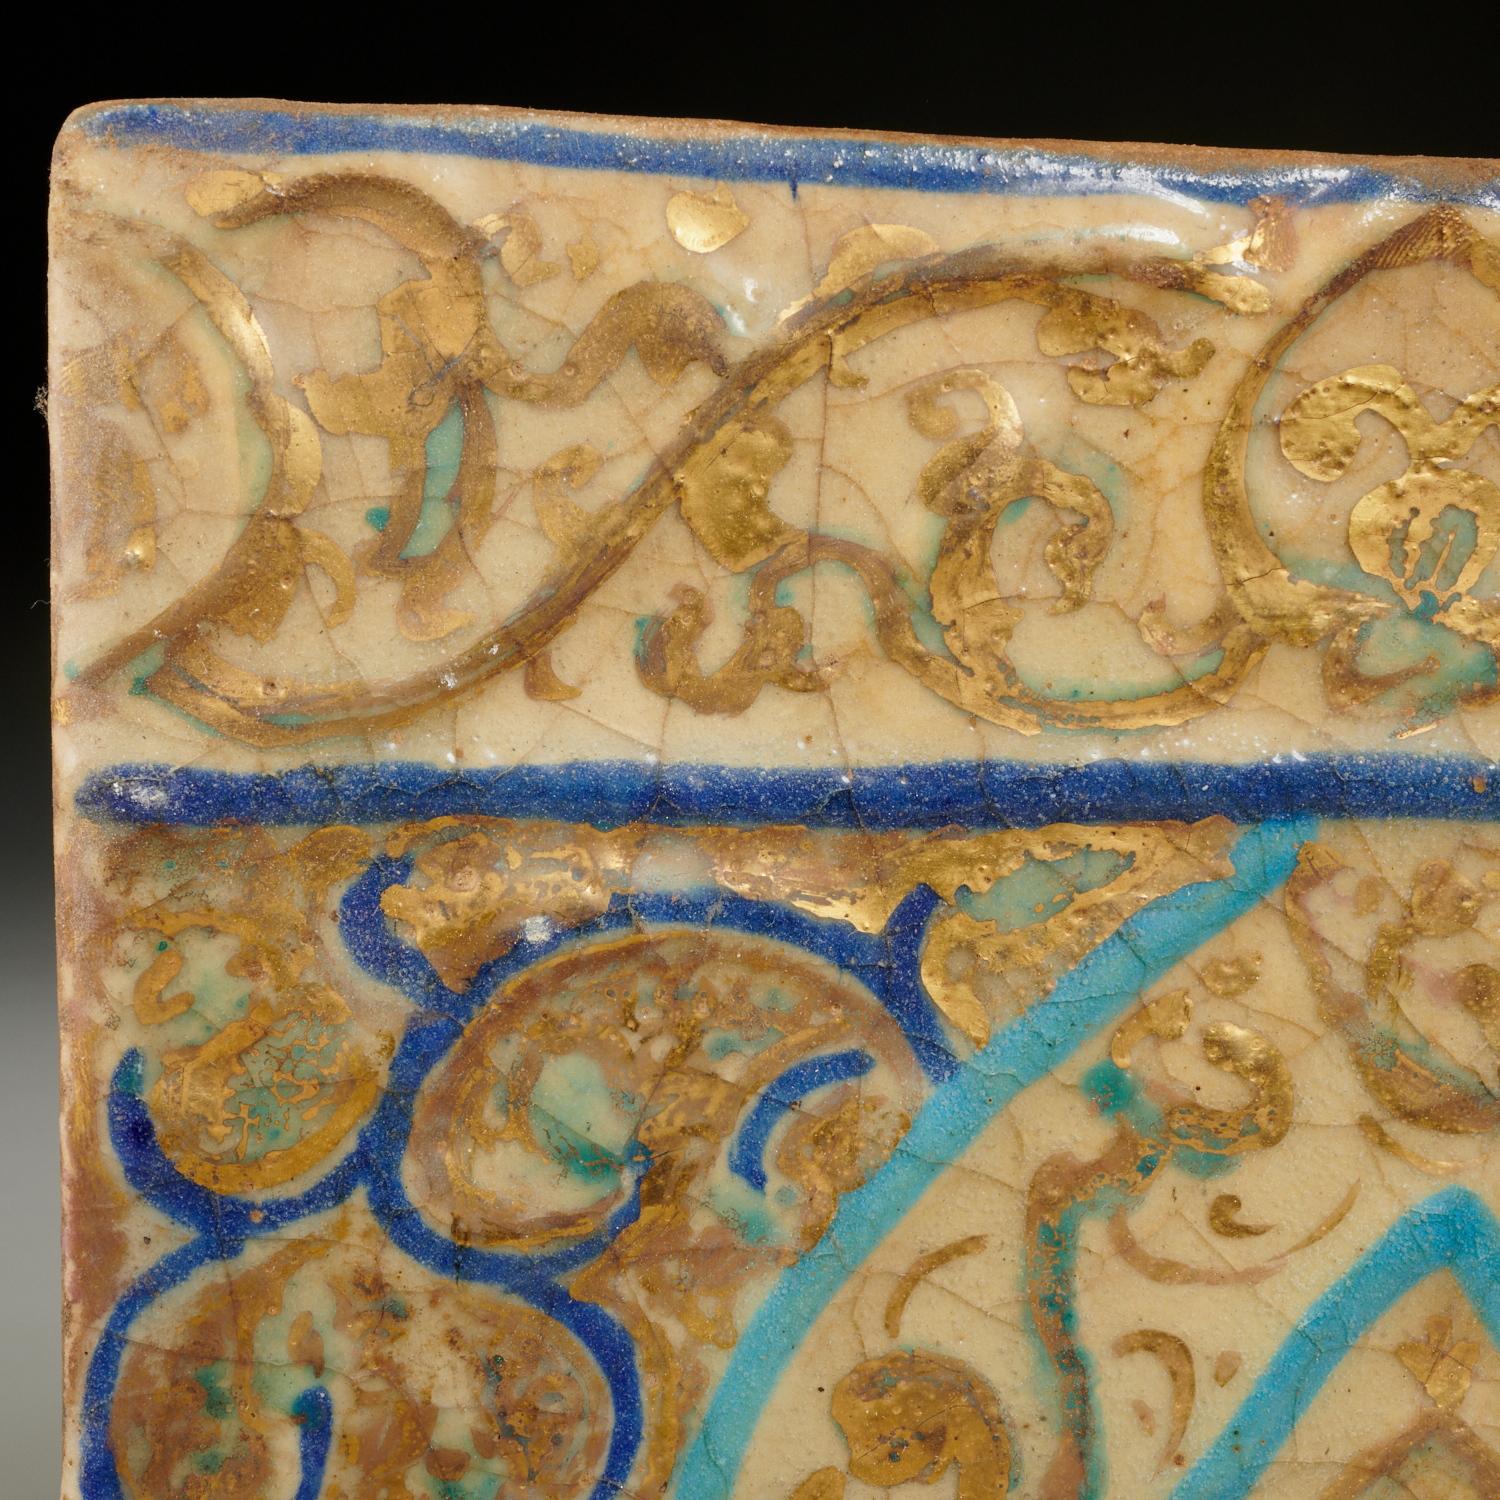 19th c., modern Iran, turquoise and cobalt blue under-glaze with a gold gilt luster over-glaze, on molded ceramic. Depicting arches and floral scrolls with Arabic script. A beautiful example of superb artisan craftsmanship. Highly